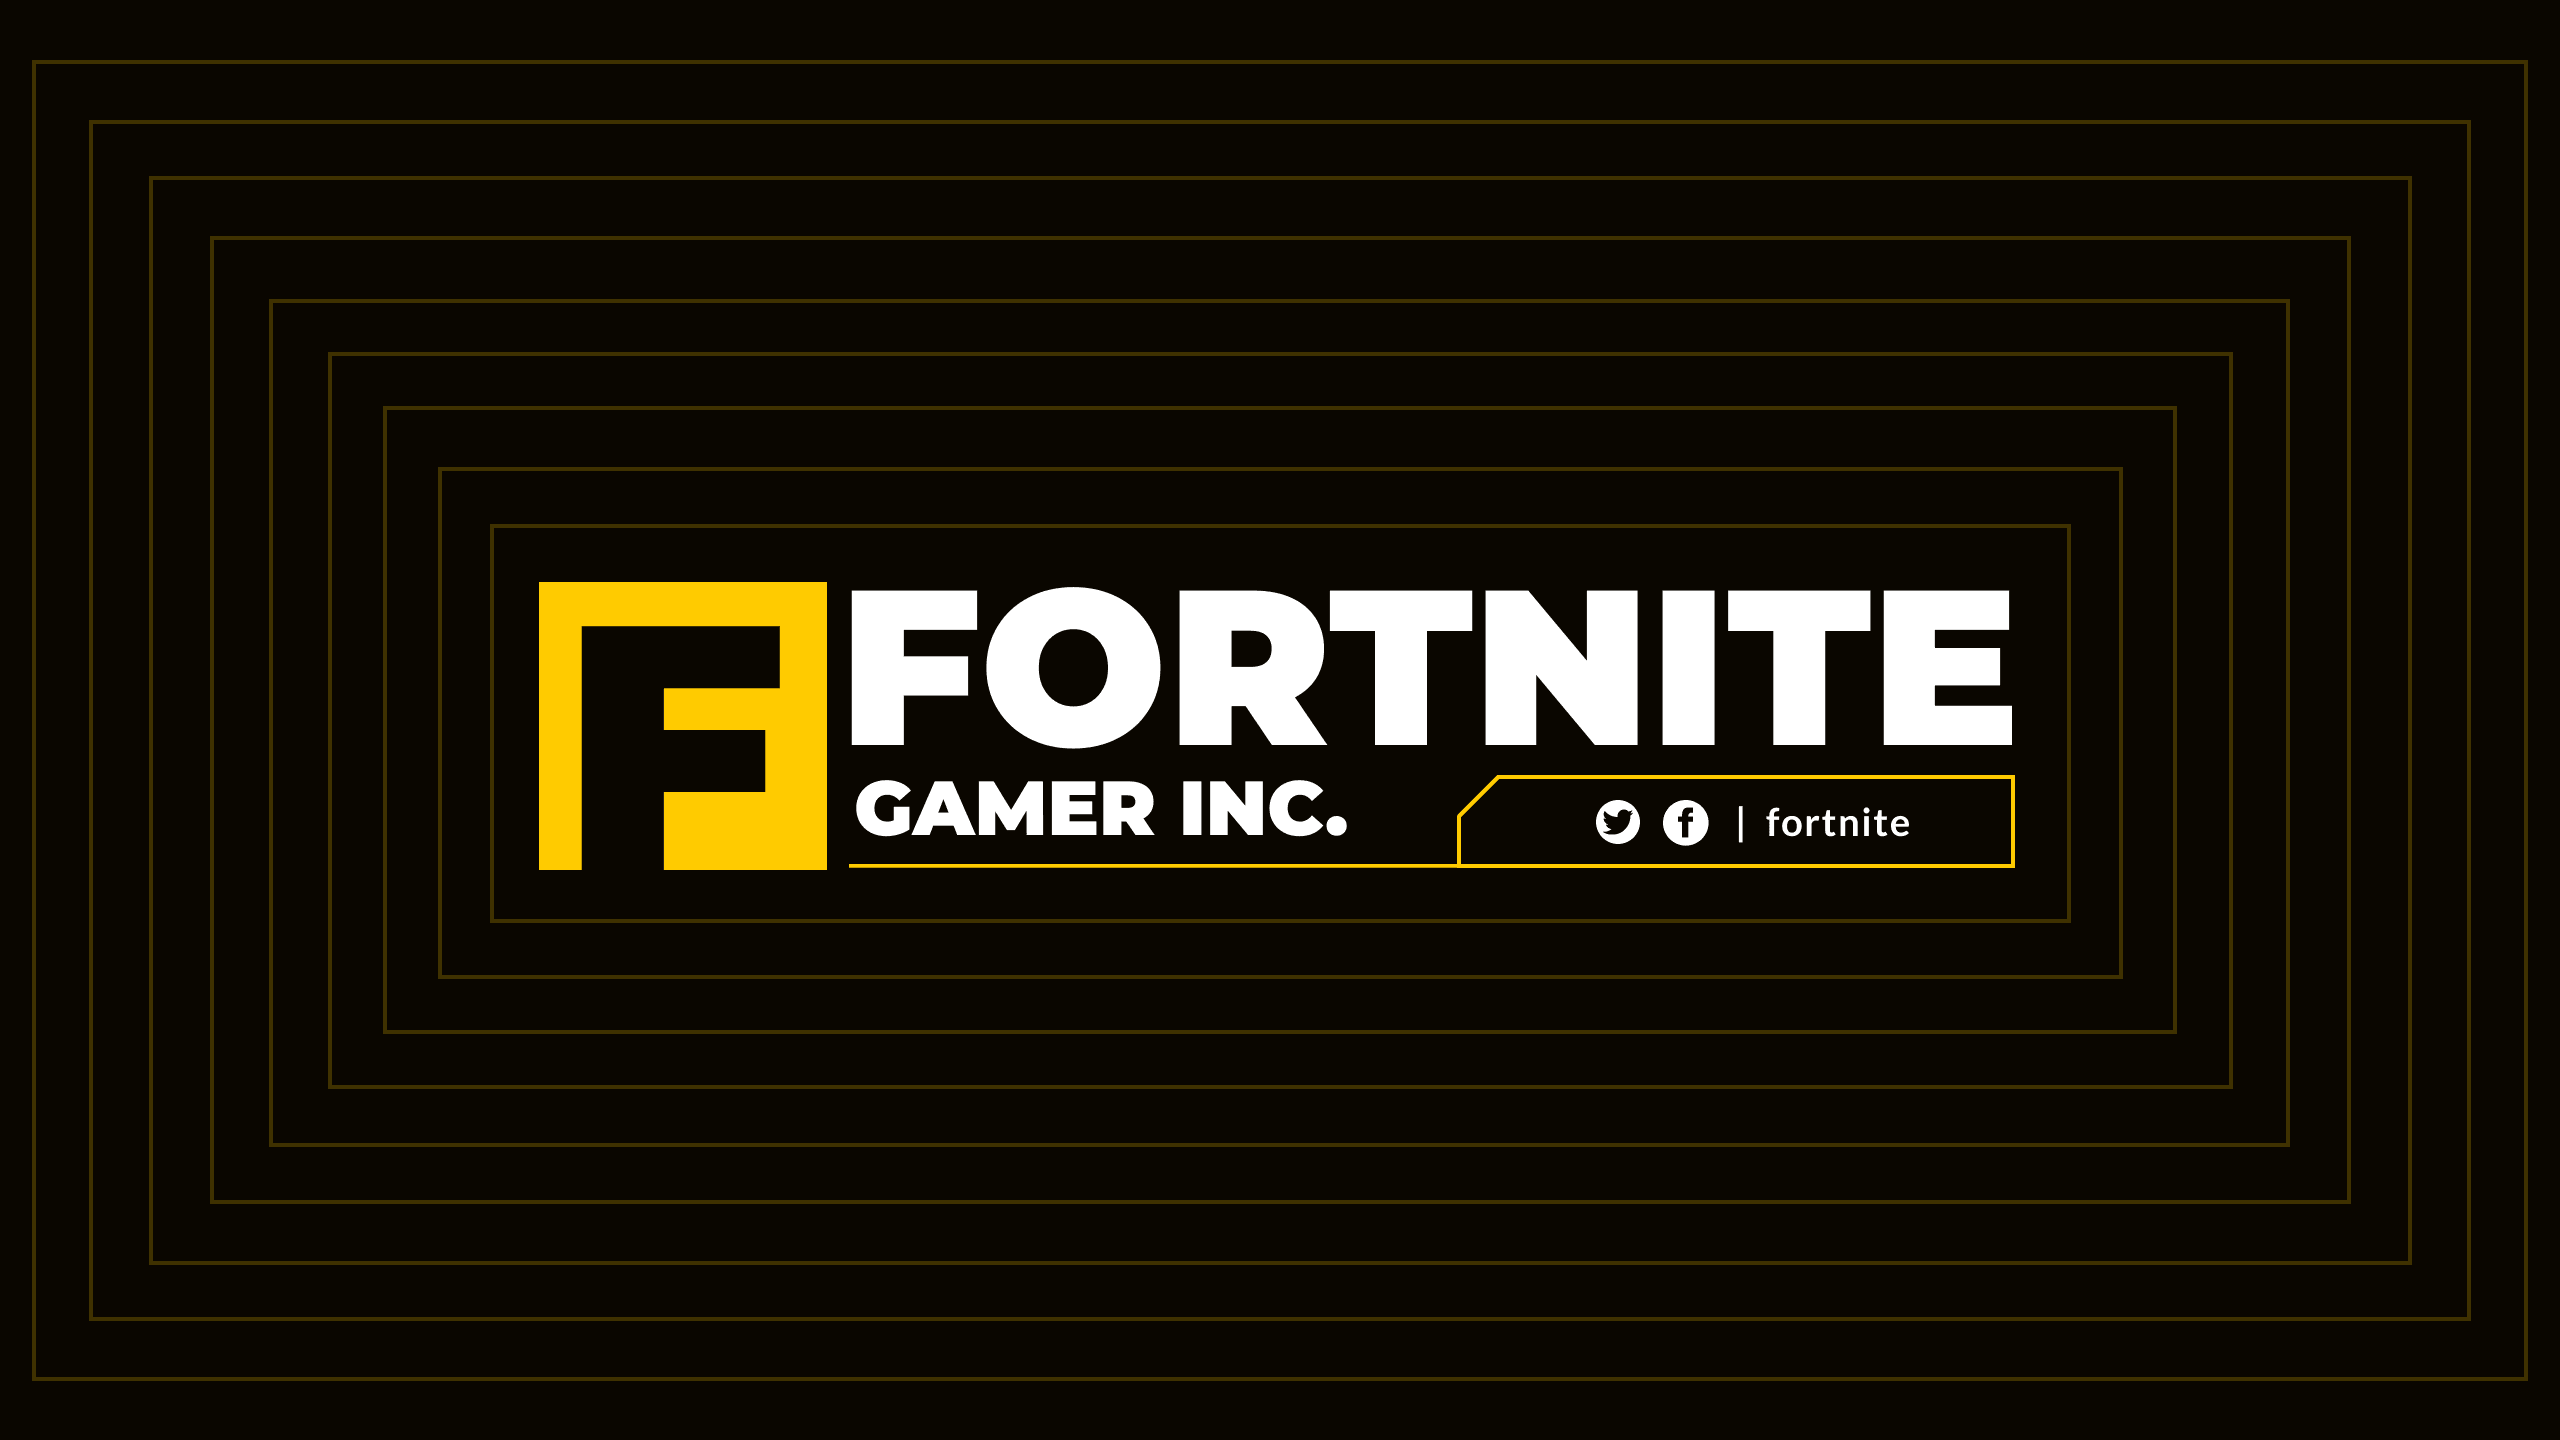 fortnite-gaming-content-with-black-background-and-line-patternsyoutube-channel-art-thumbnail-img